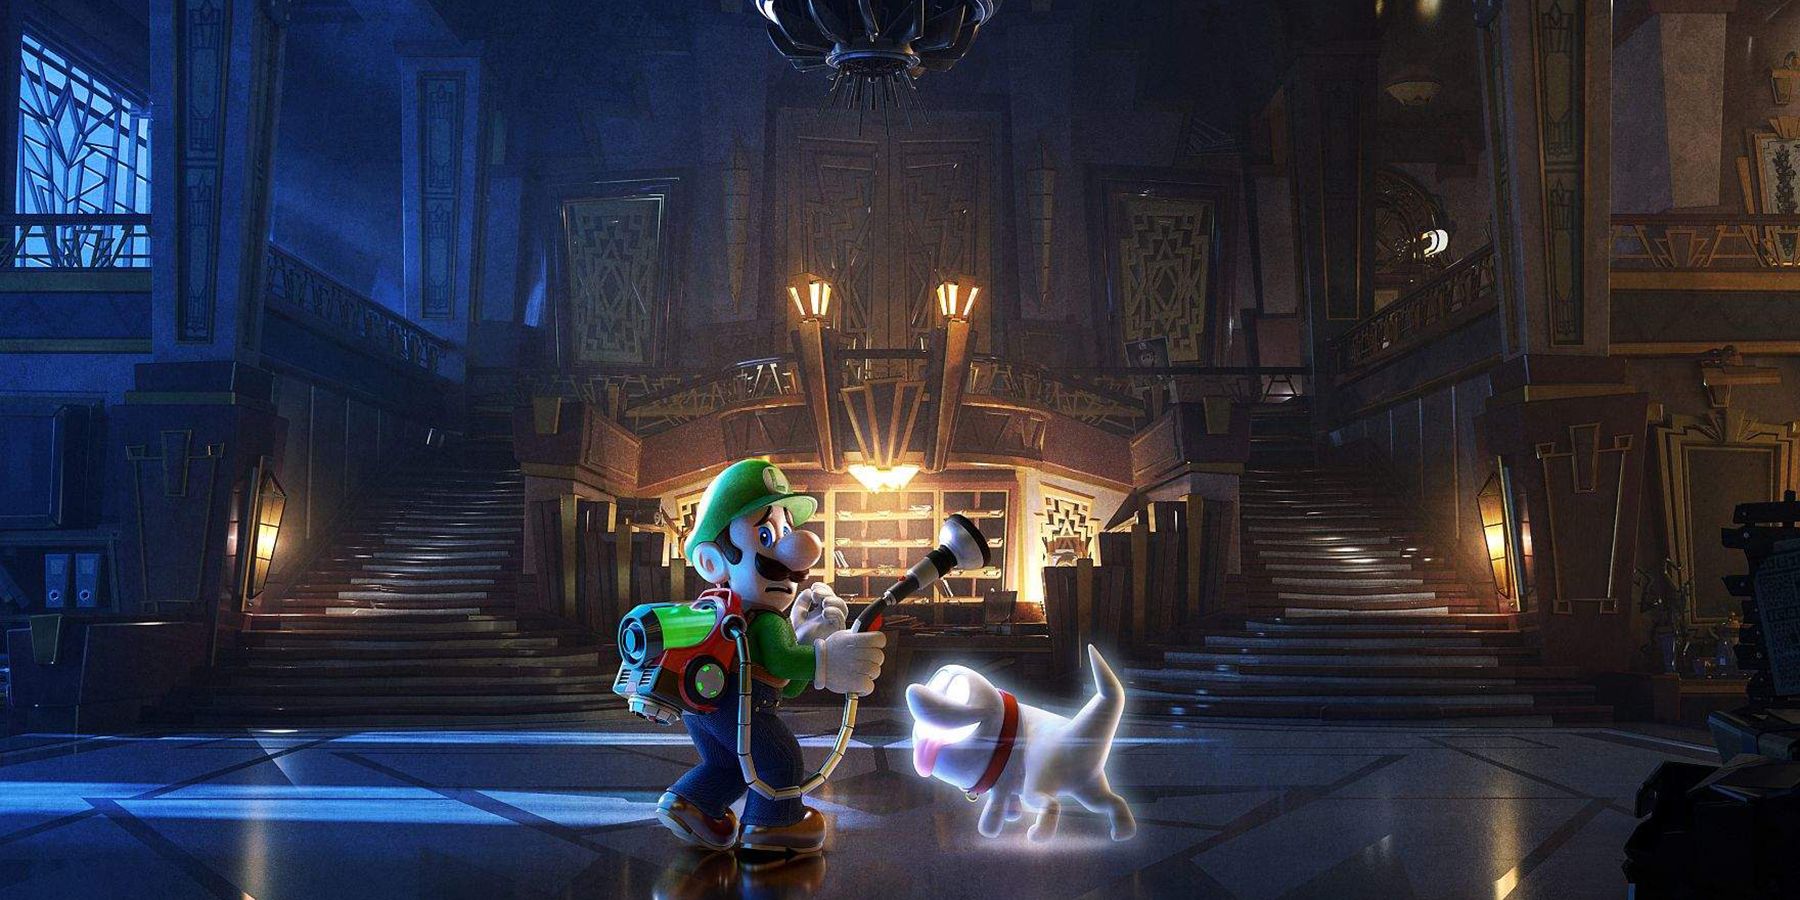 Looking Back on 20 Years of Luigis Mansion